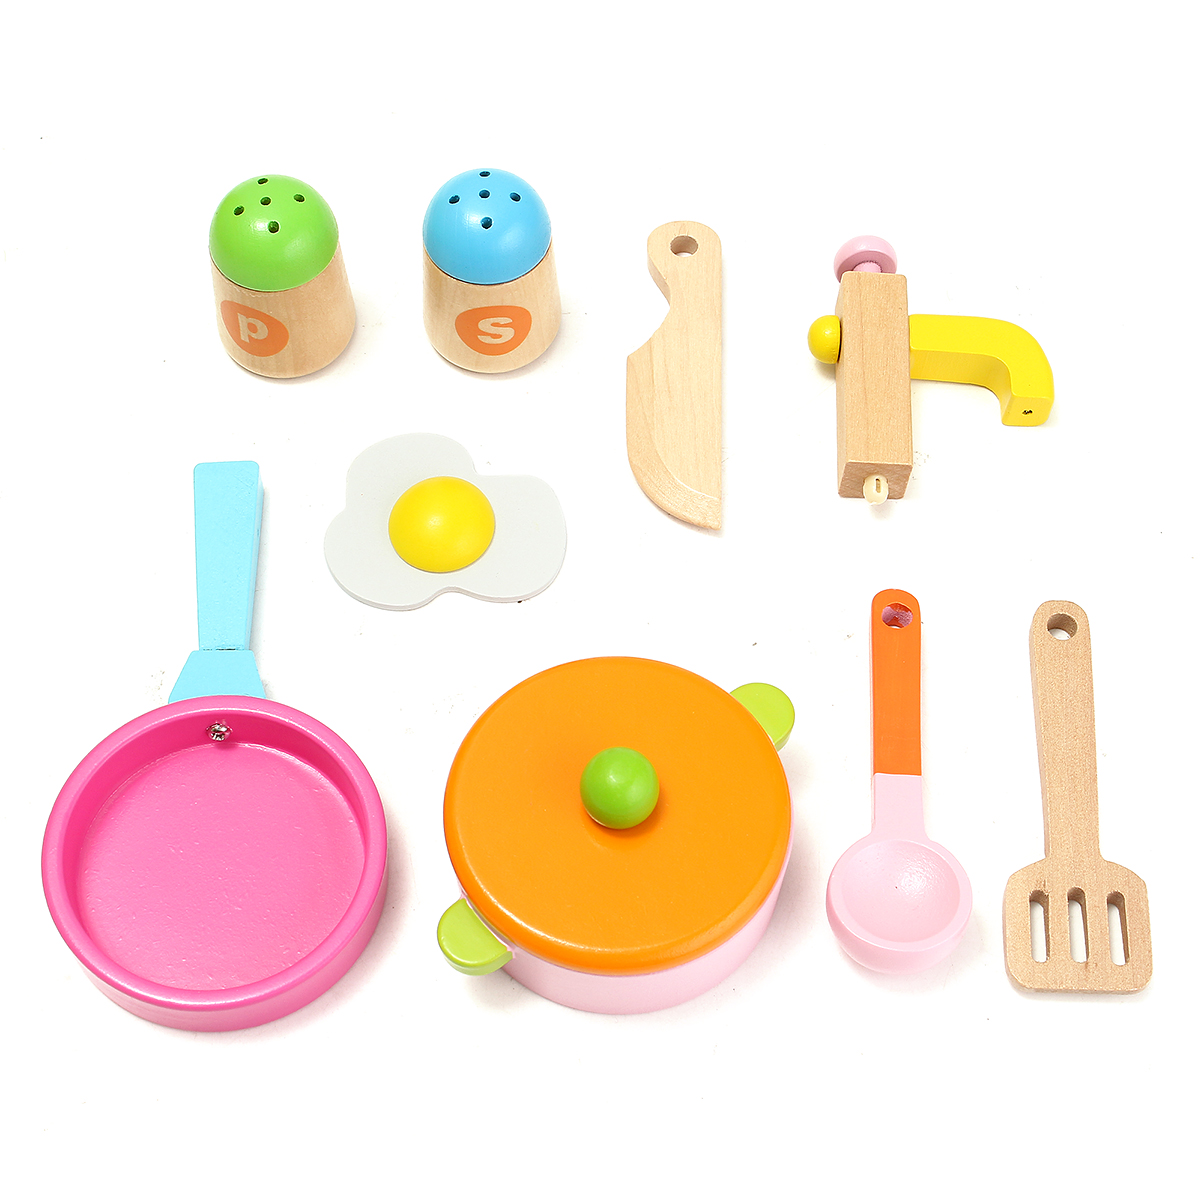 colorful <strong>kitchen</strong> wooden wood pretend gas stove toy model set for